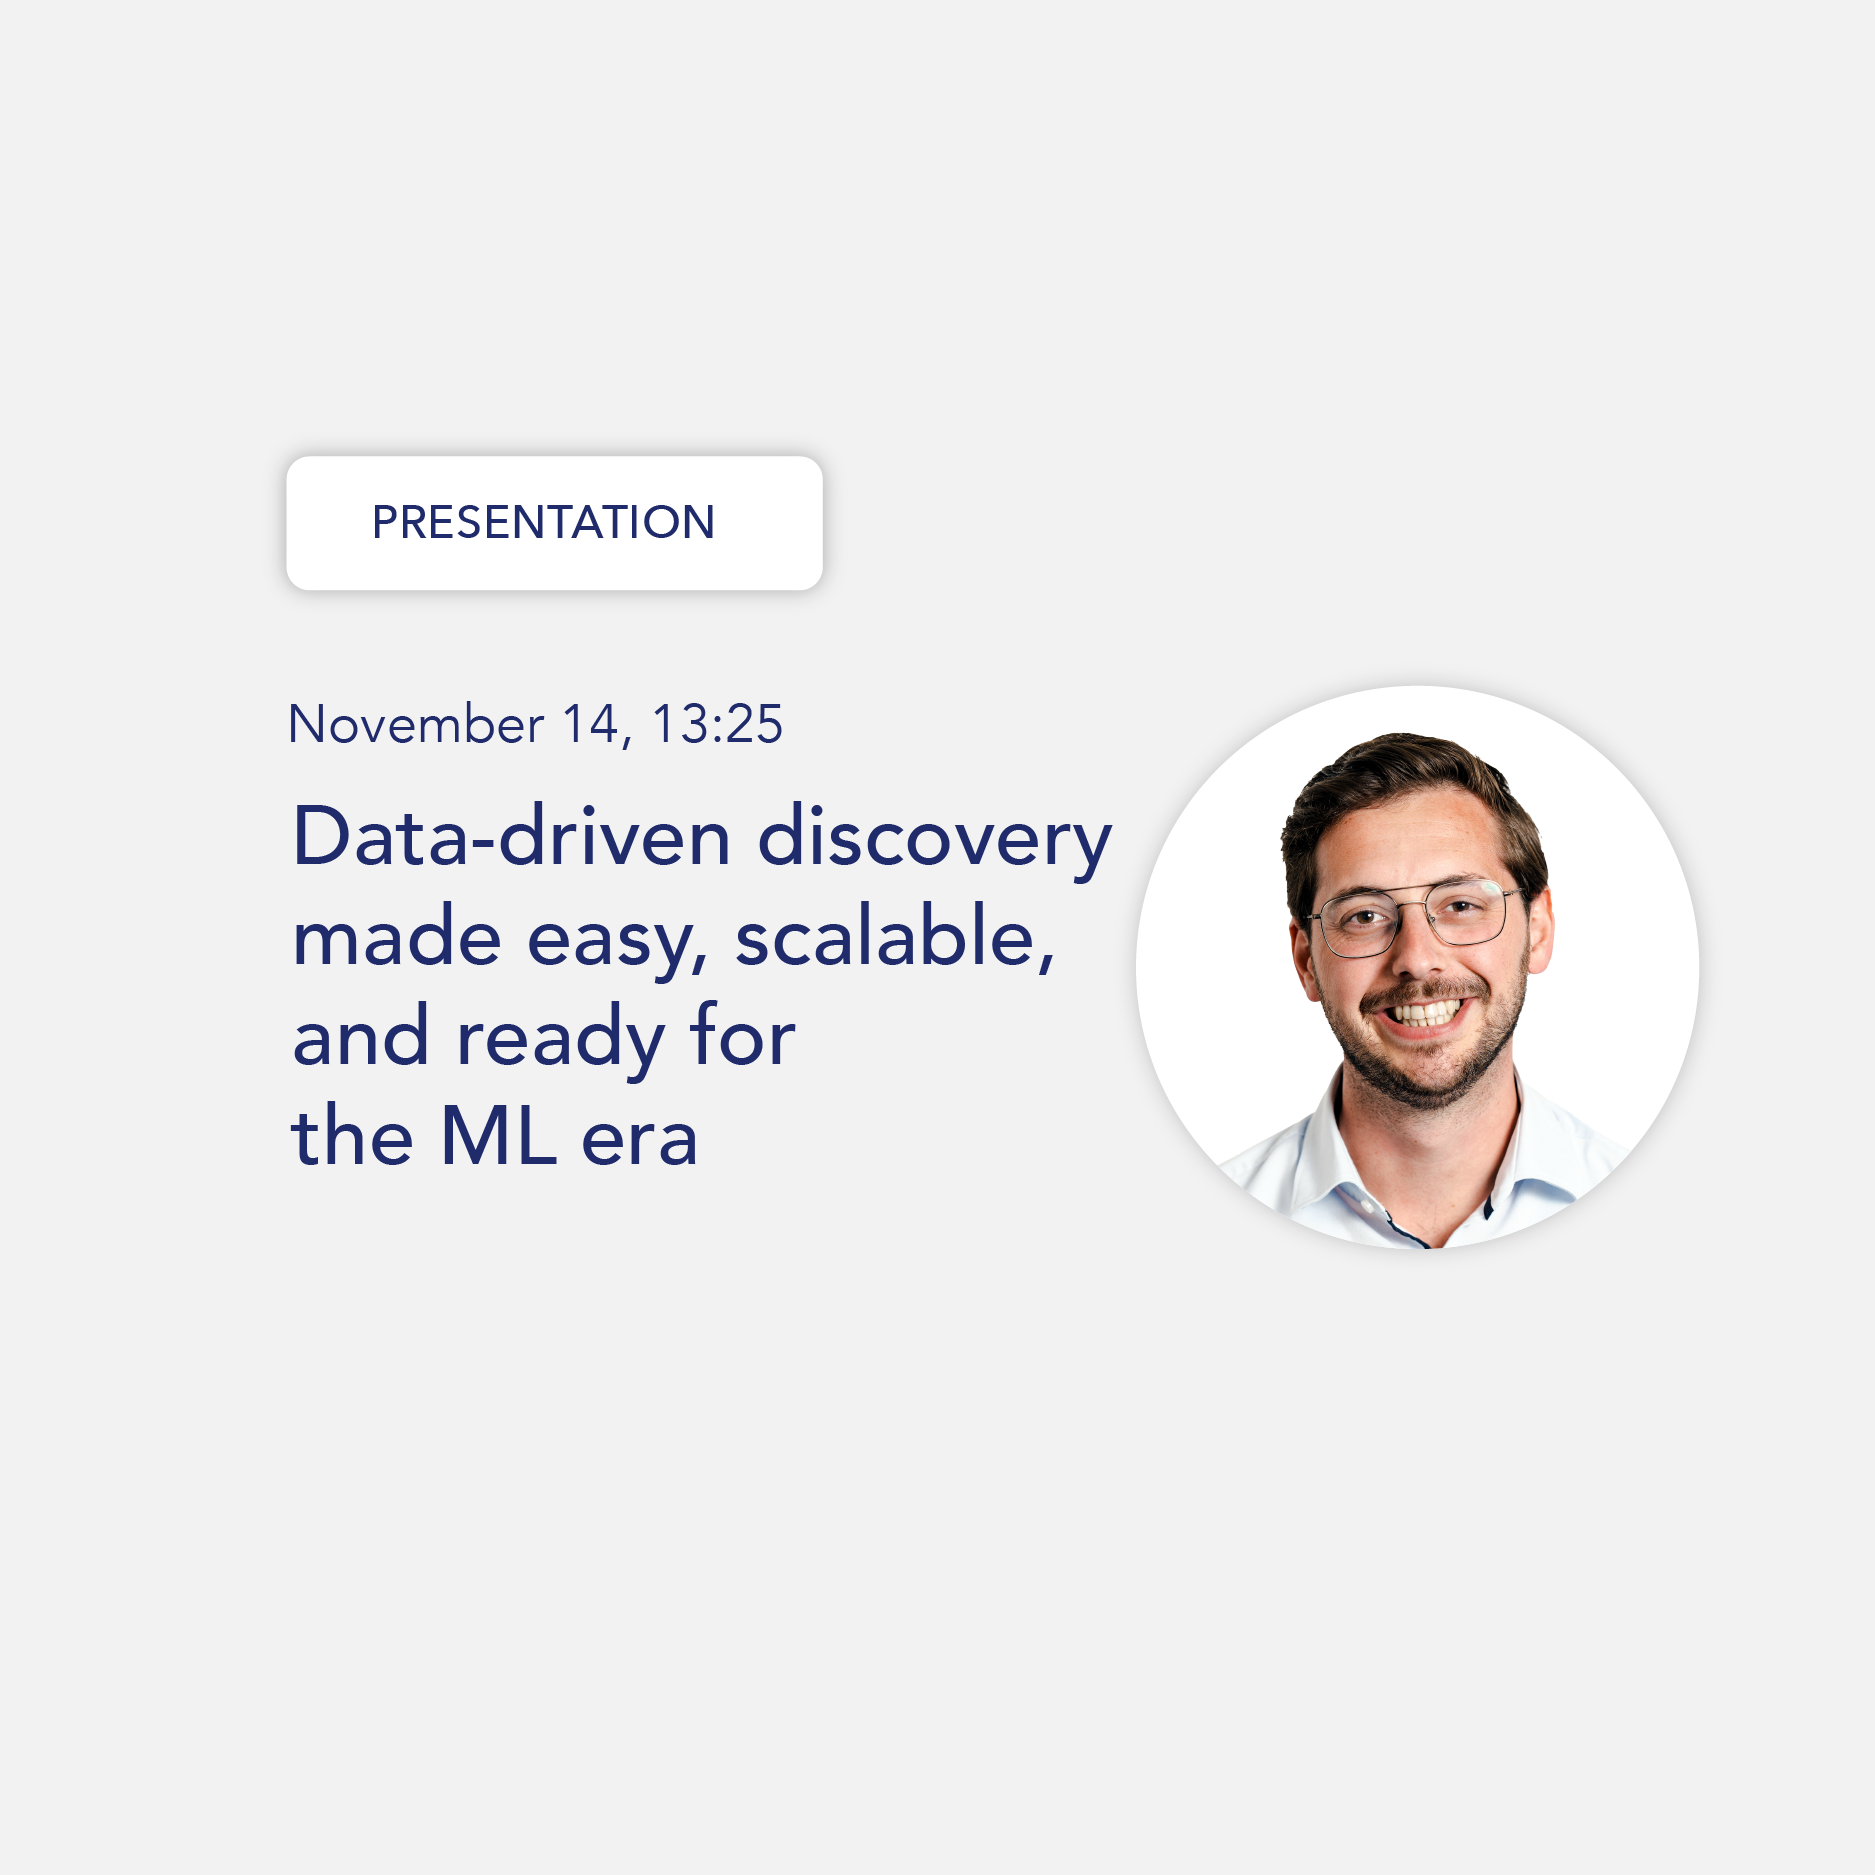 Piotr van Rijssel presenting "Data-driven discovery made easy, scalable, and ready for the ML era" on November 14, 13:25